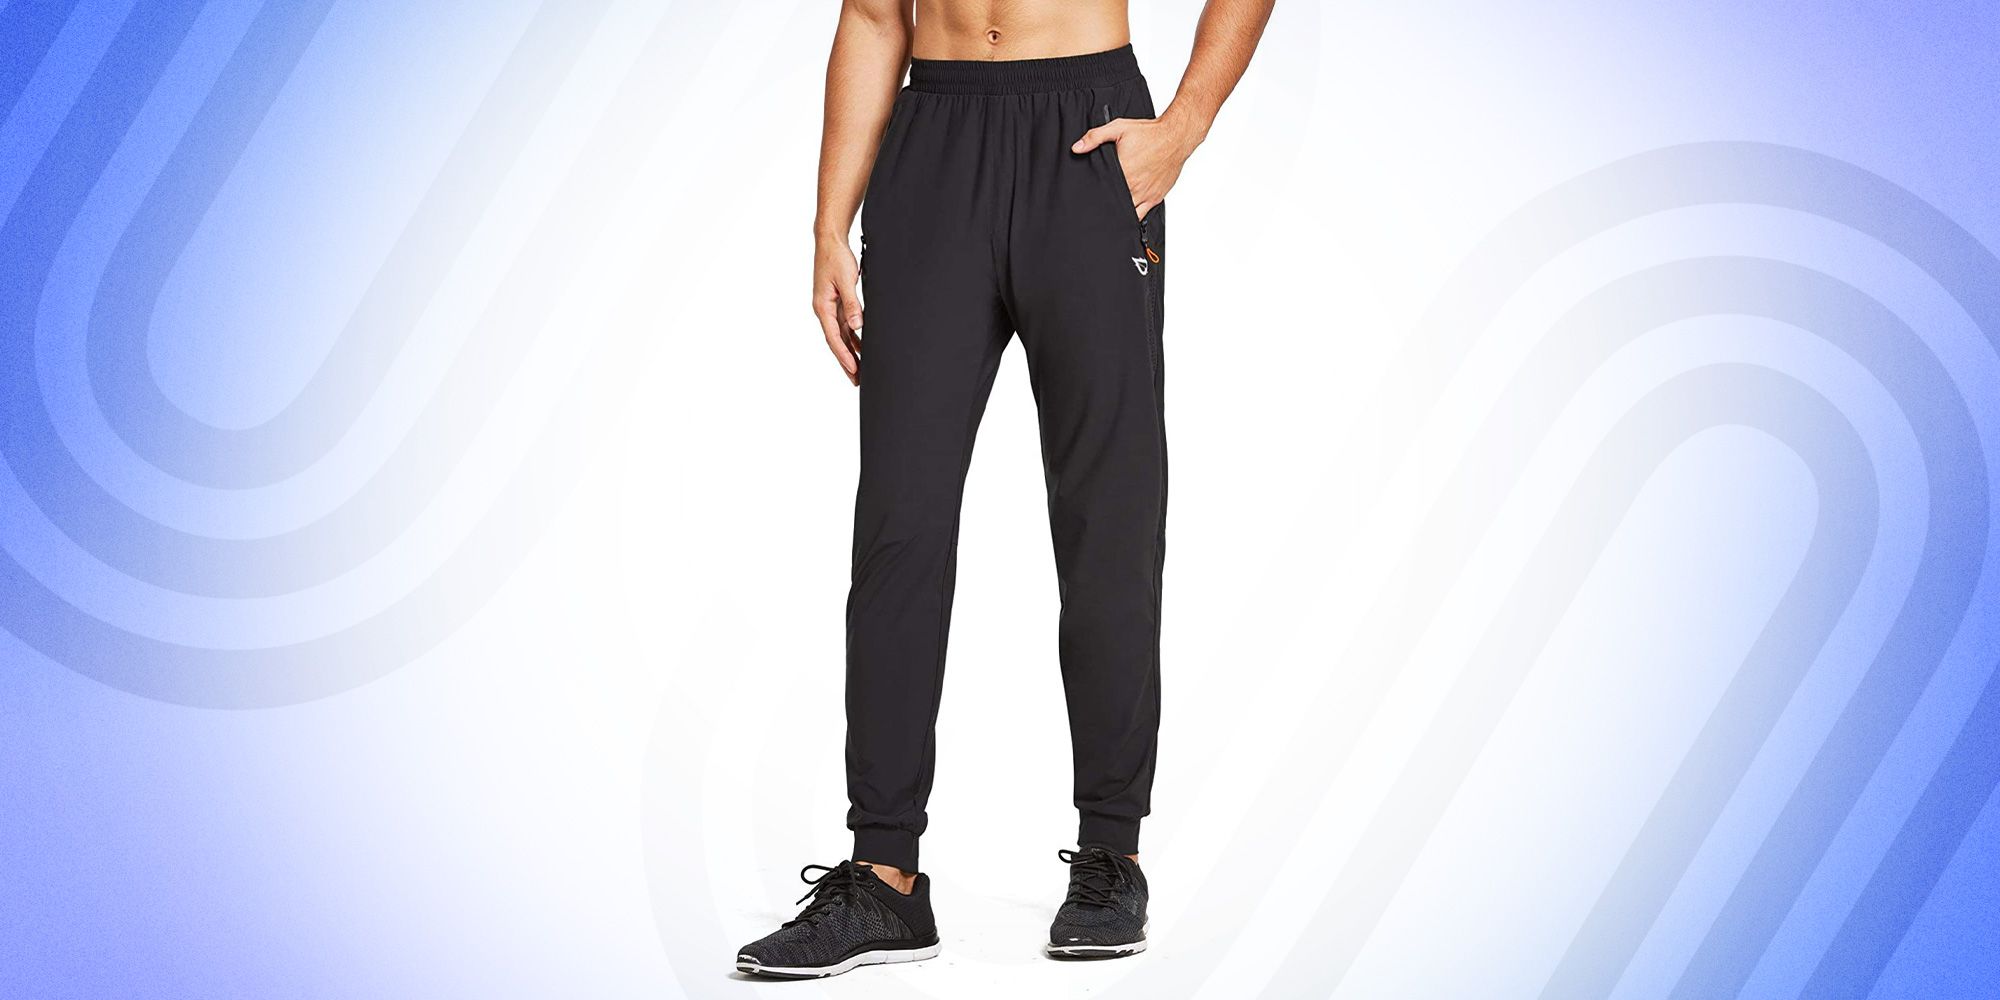 Mens Summer Activewear Pants Say No to Racism Loose Fit Trousers Sweatpants